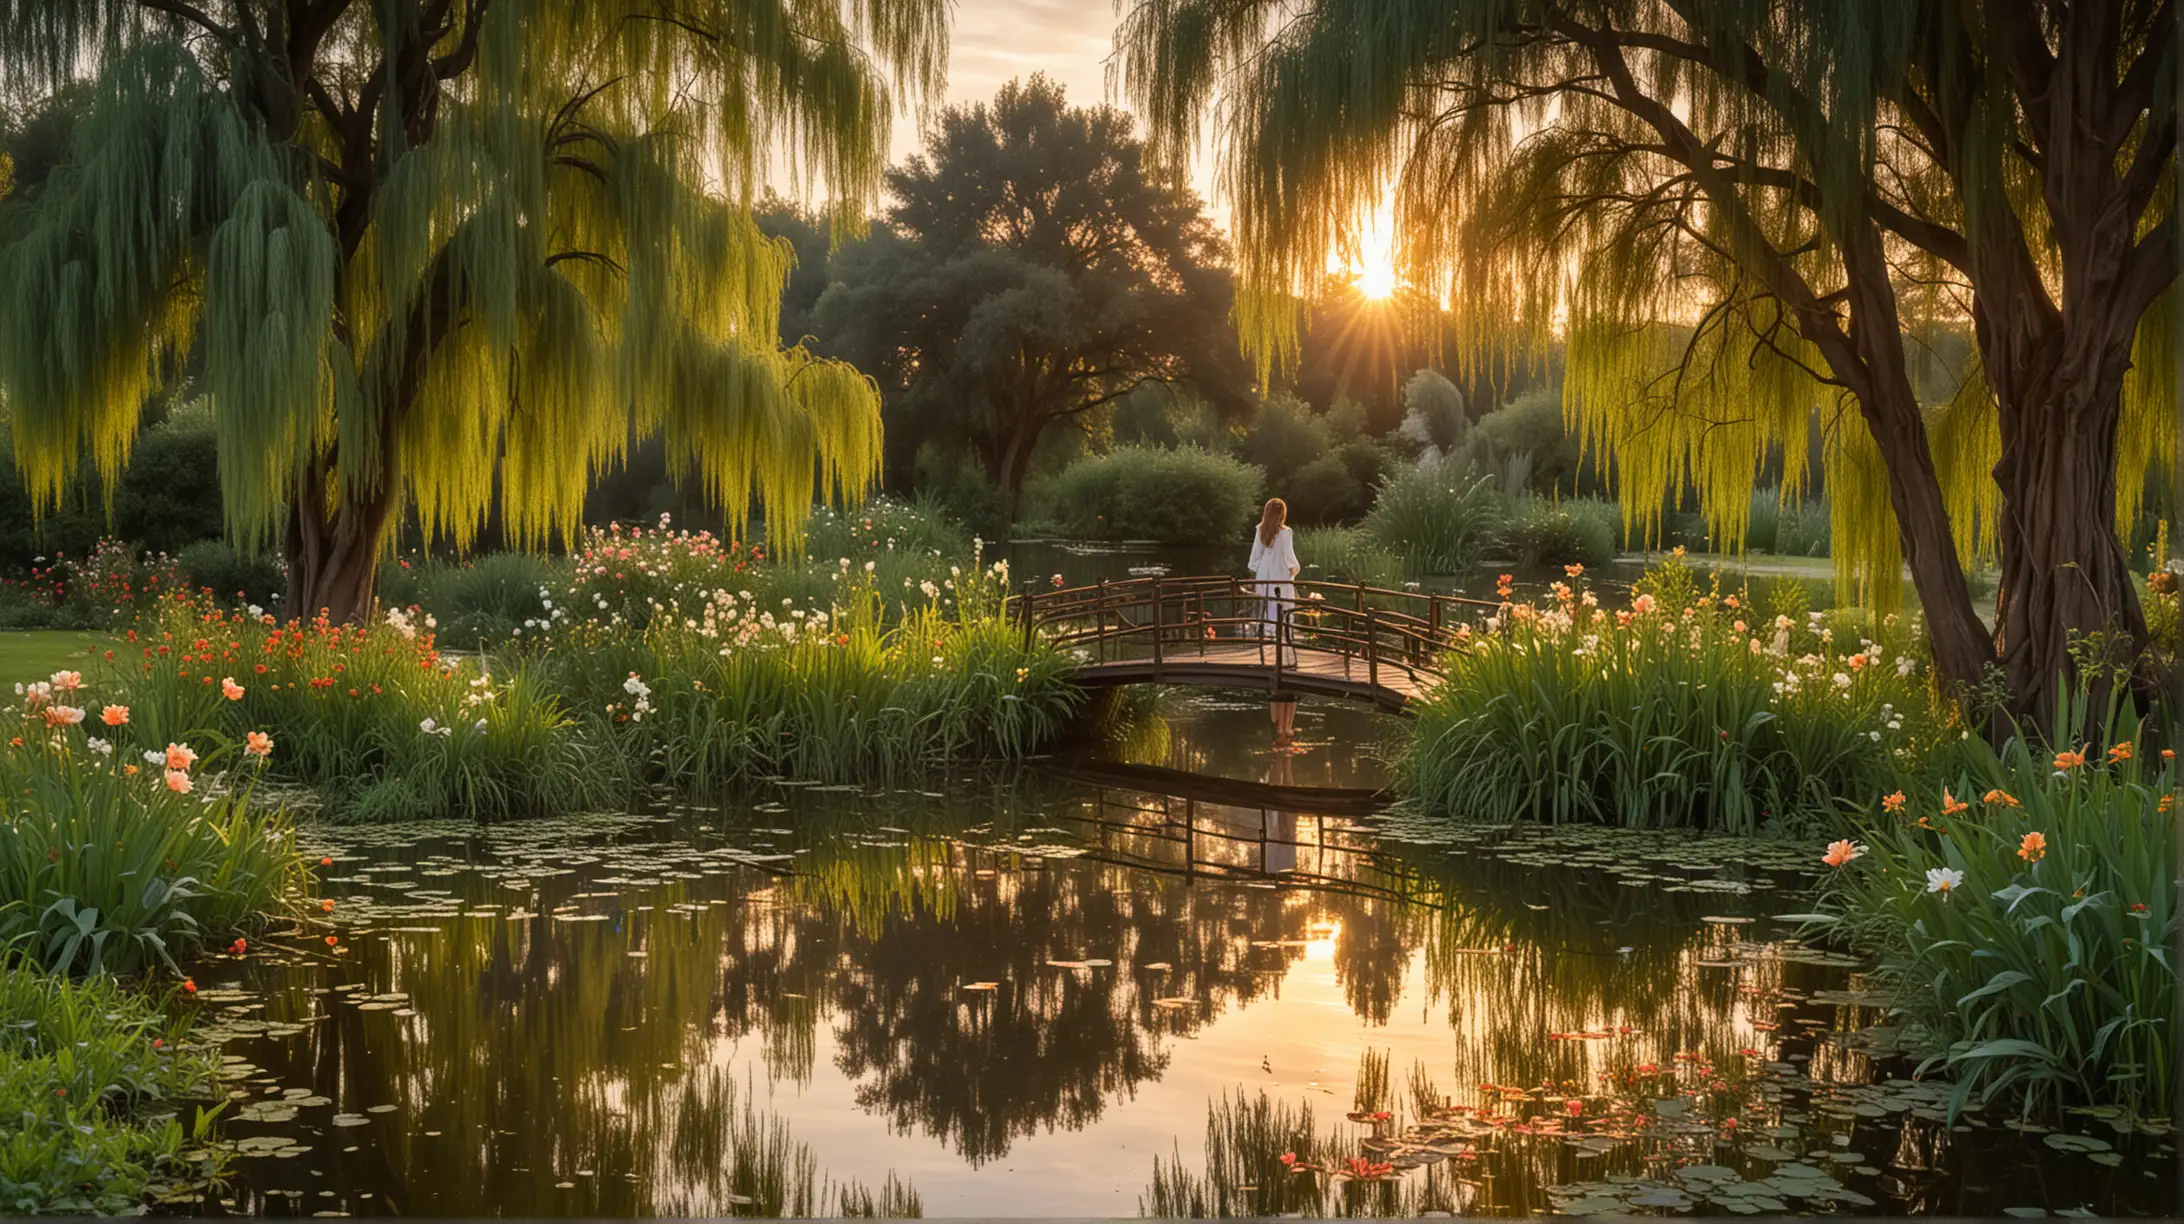 Sunset Garden Pond with Willow Trees and Young Lady on Wooden Bridge